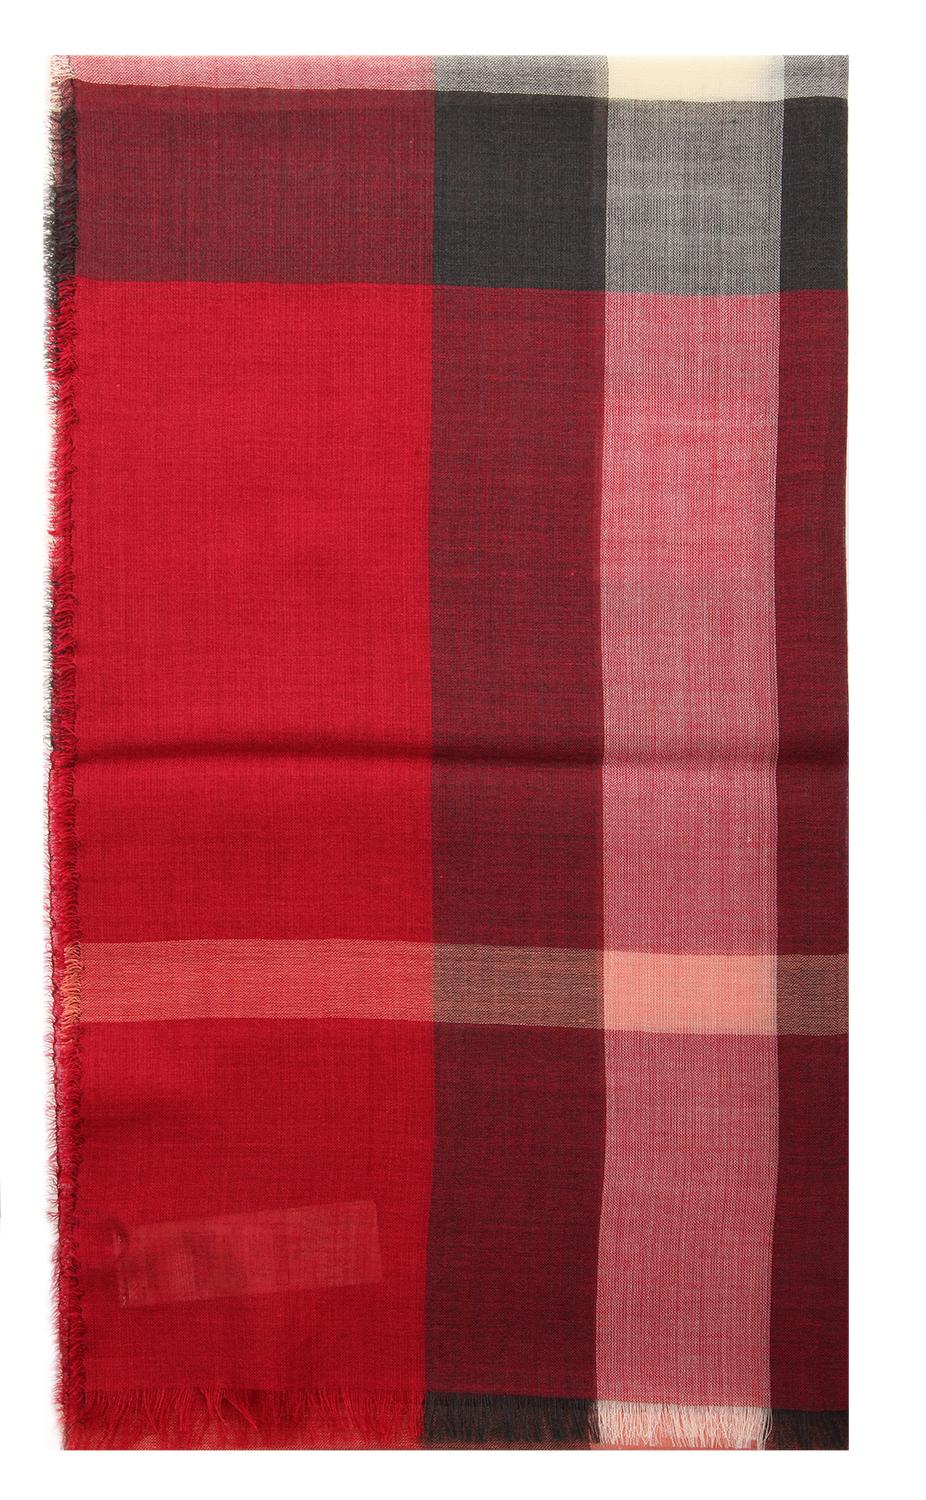 Item number 39149621
Measurements length: 180 cm, width: 50 cm, Color red-black-white, Material 49% silk, 51% wool
Washing Specialist dry clean
Weight in grams approx. 45
Features Check Lightweight Scarf